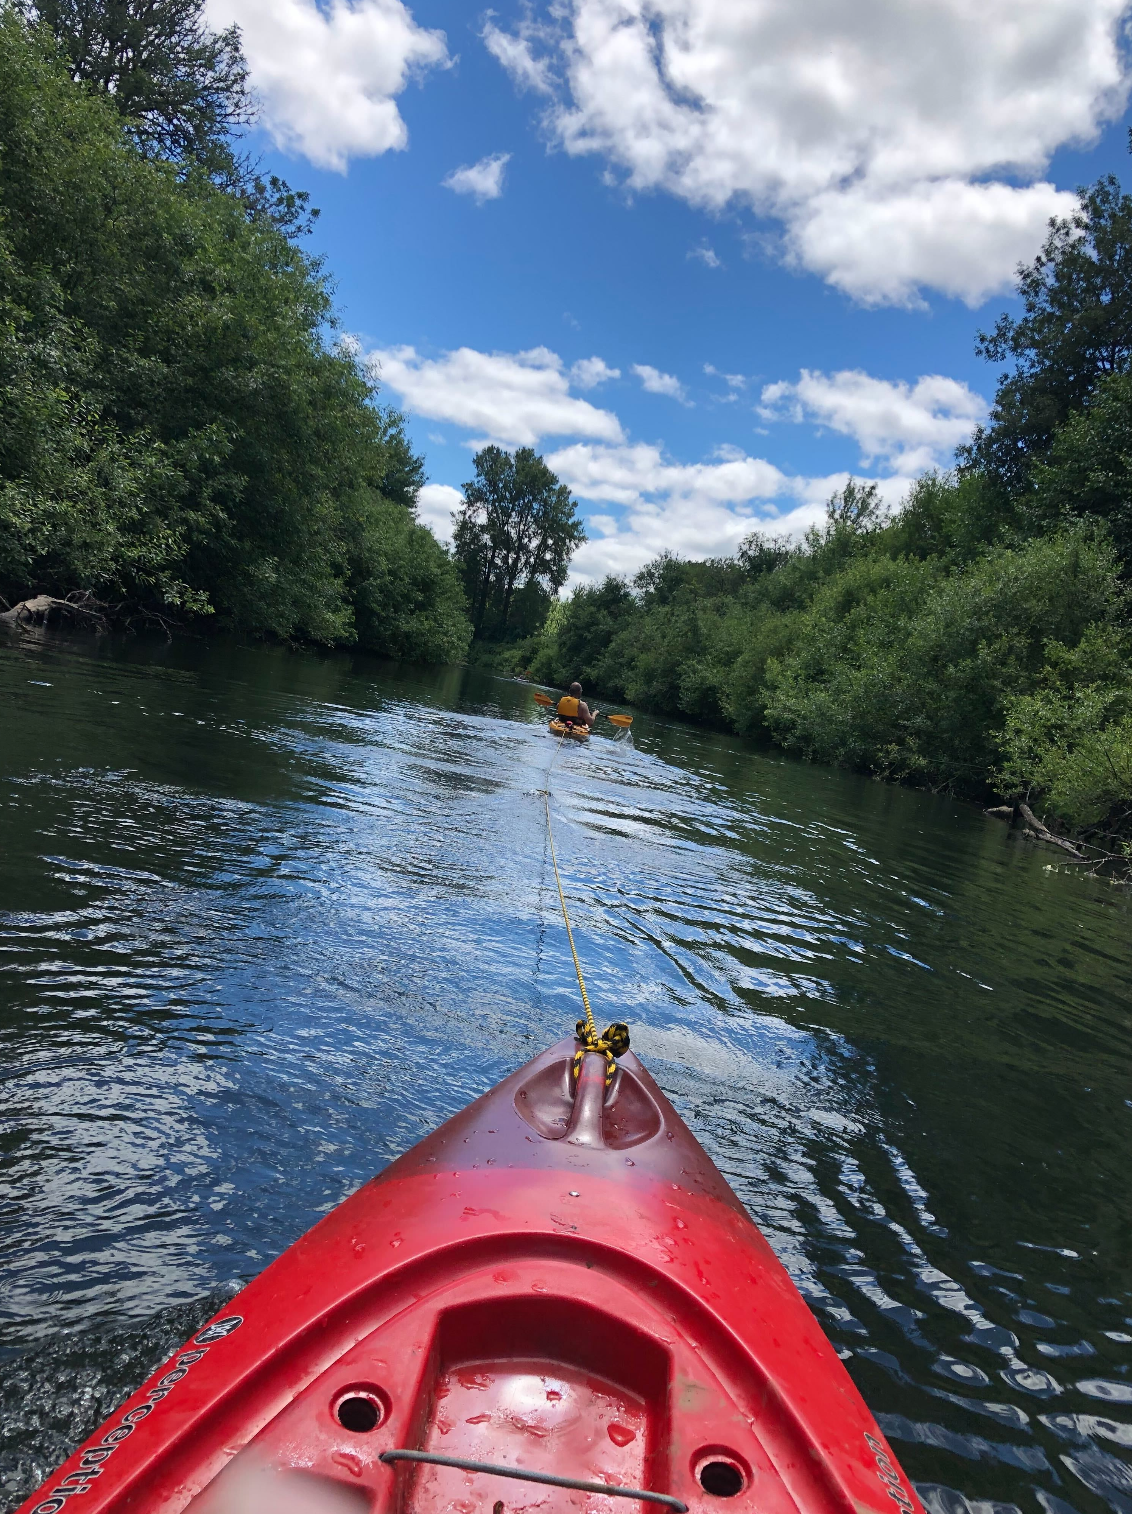 One of our Assistant Researchers, Lindsay, enjoying the view on the Willamette River in Corvallis.